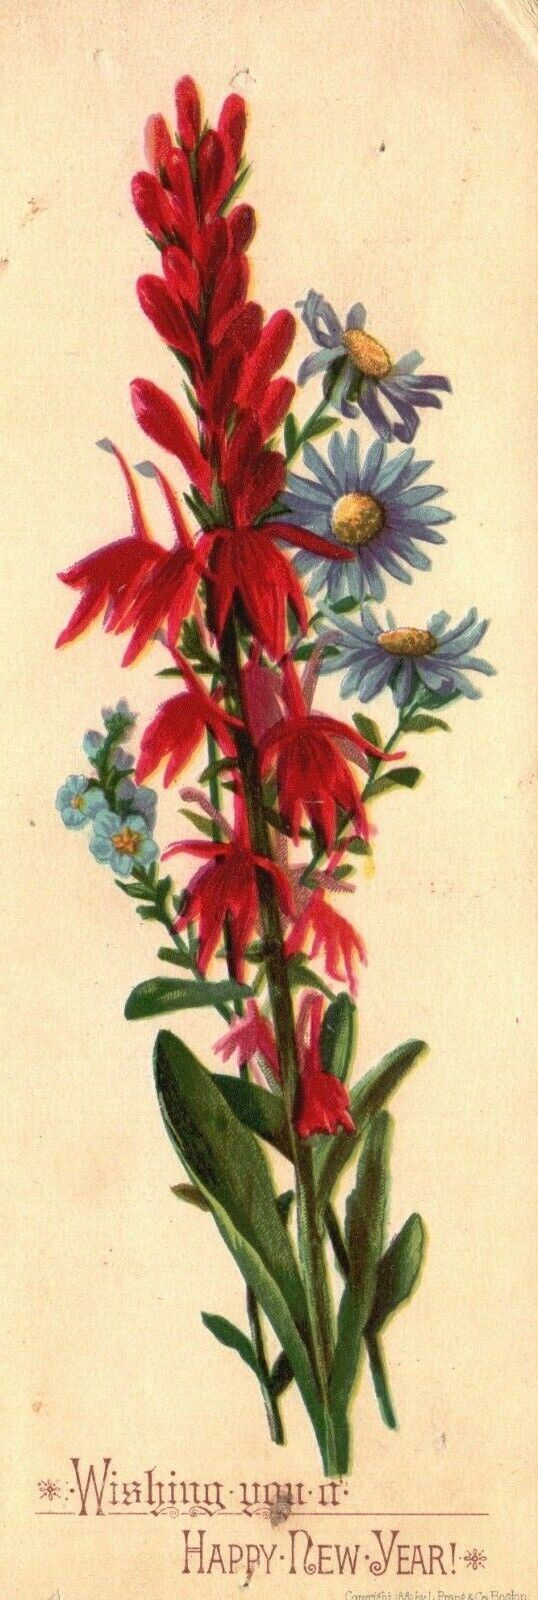 1880s-90s Red & Blue Flowers Wishing You A Happy New Year Trade Card